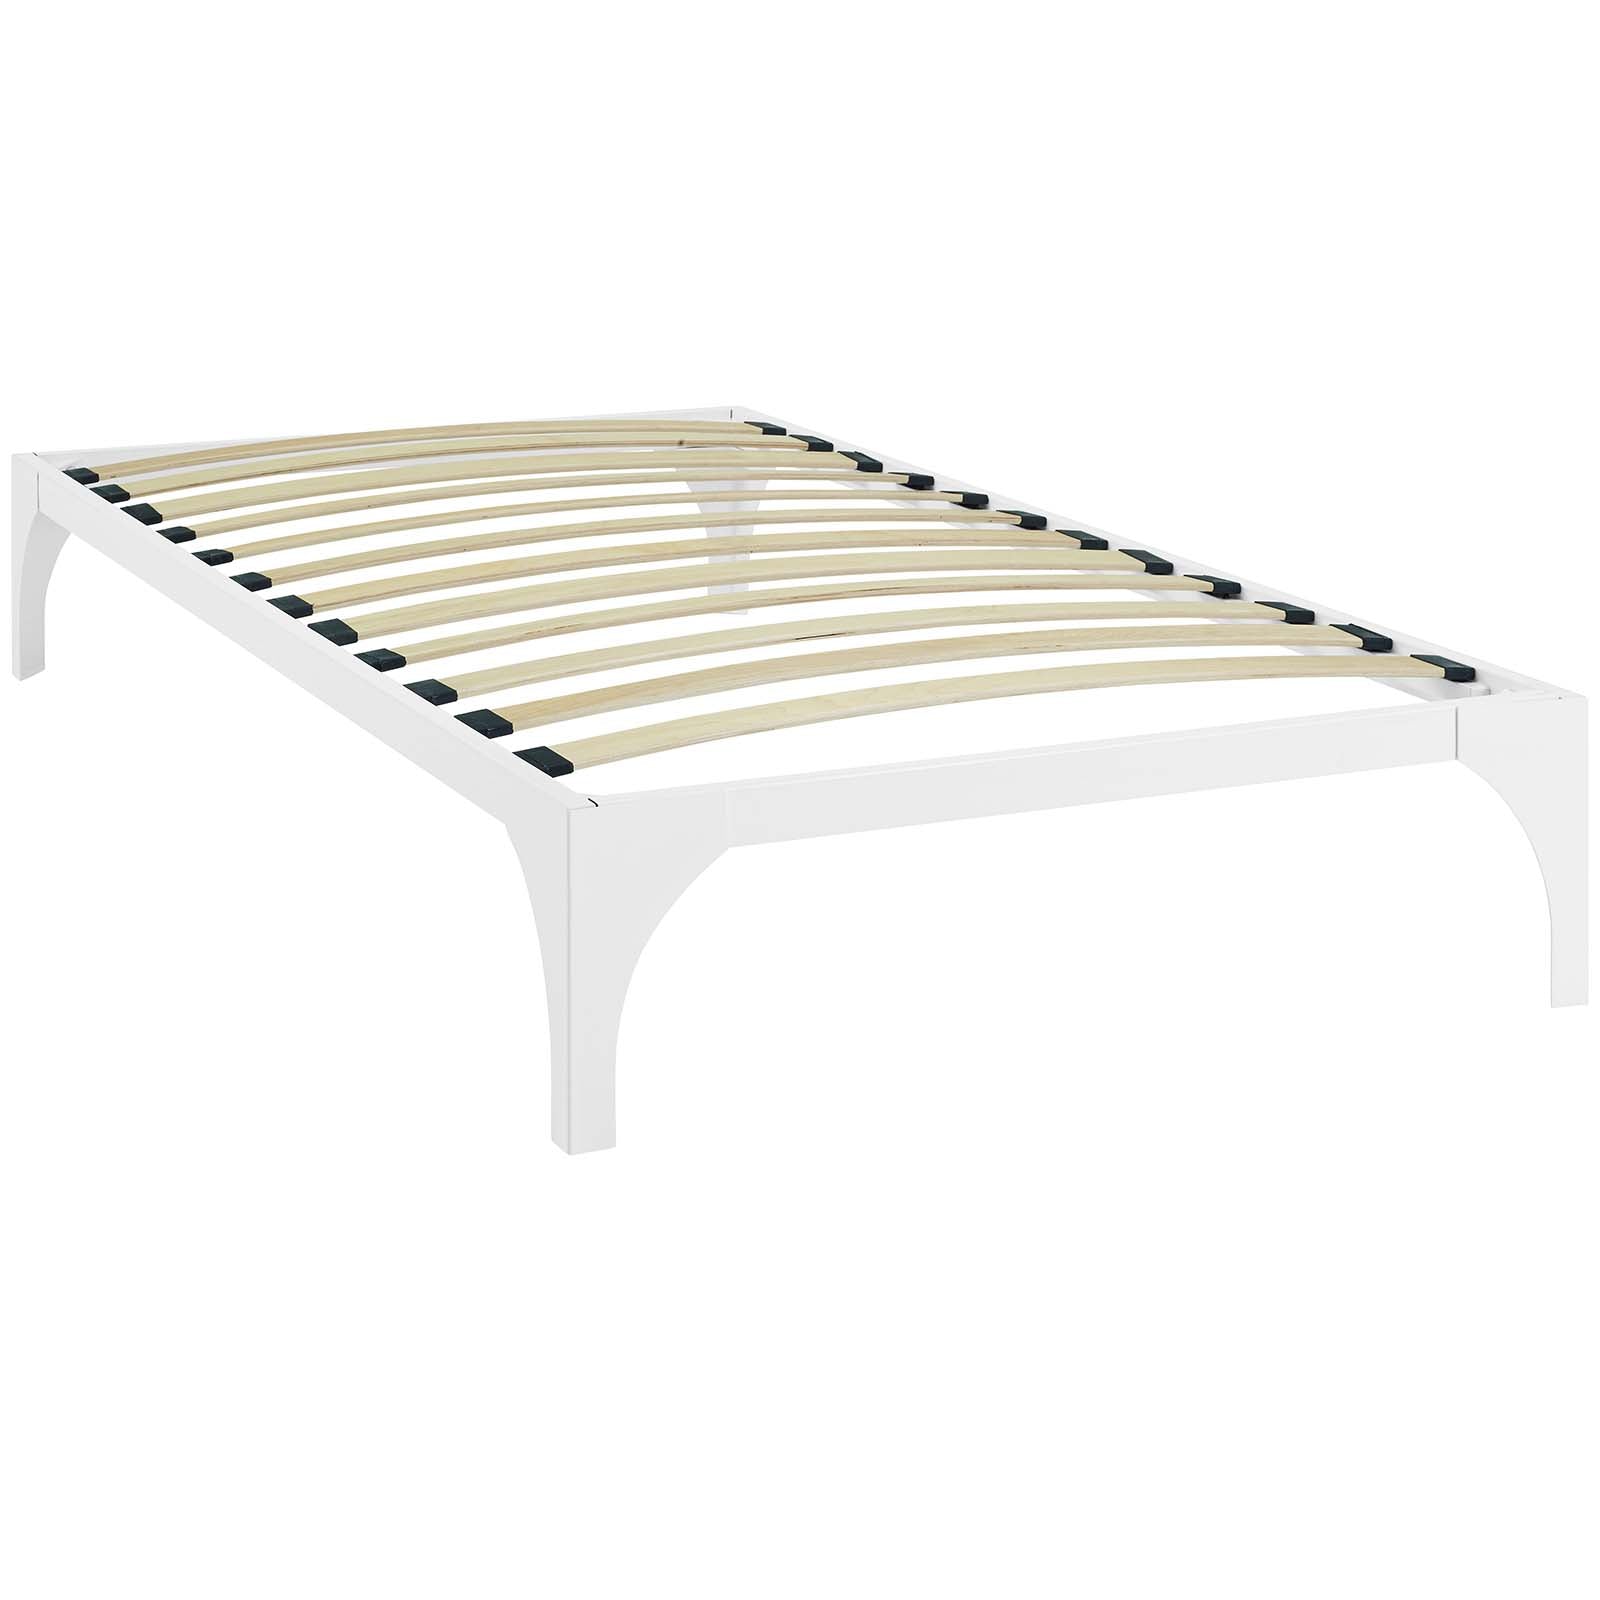 Modway Beds - Ollie Twin Bed Frame White